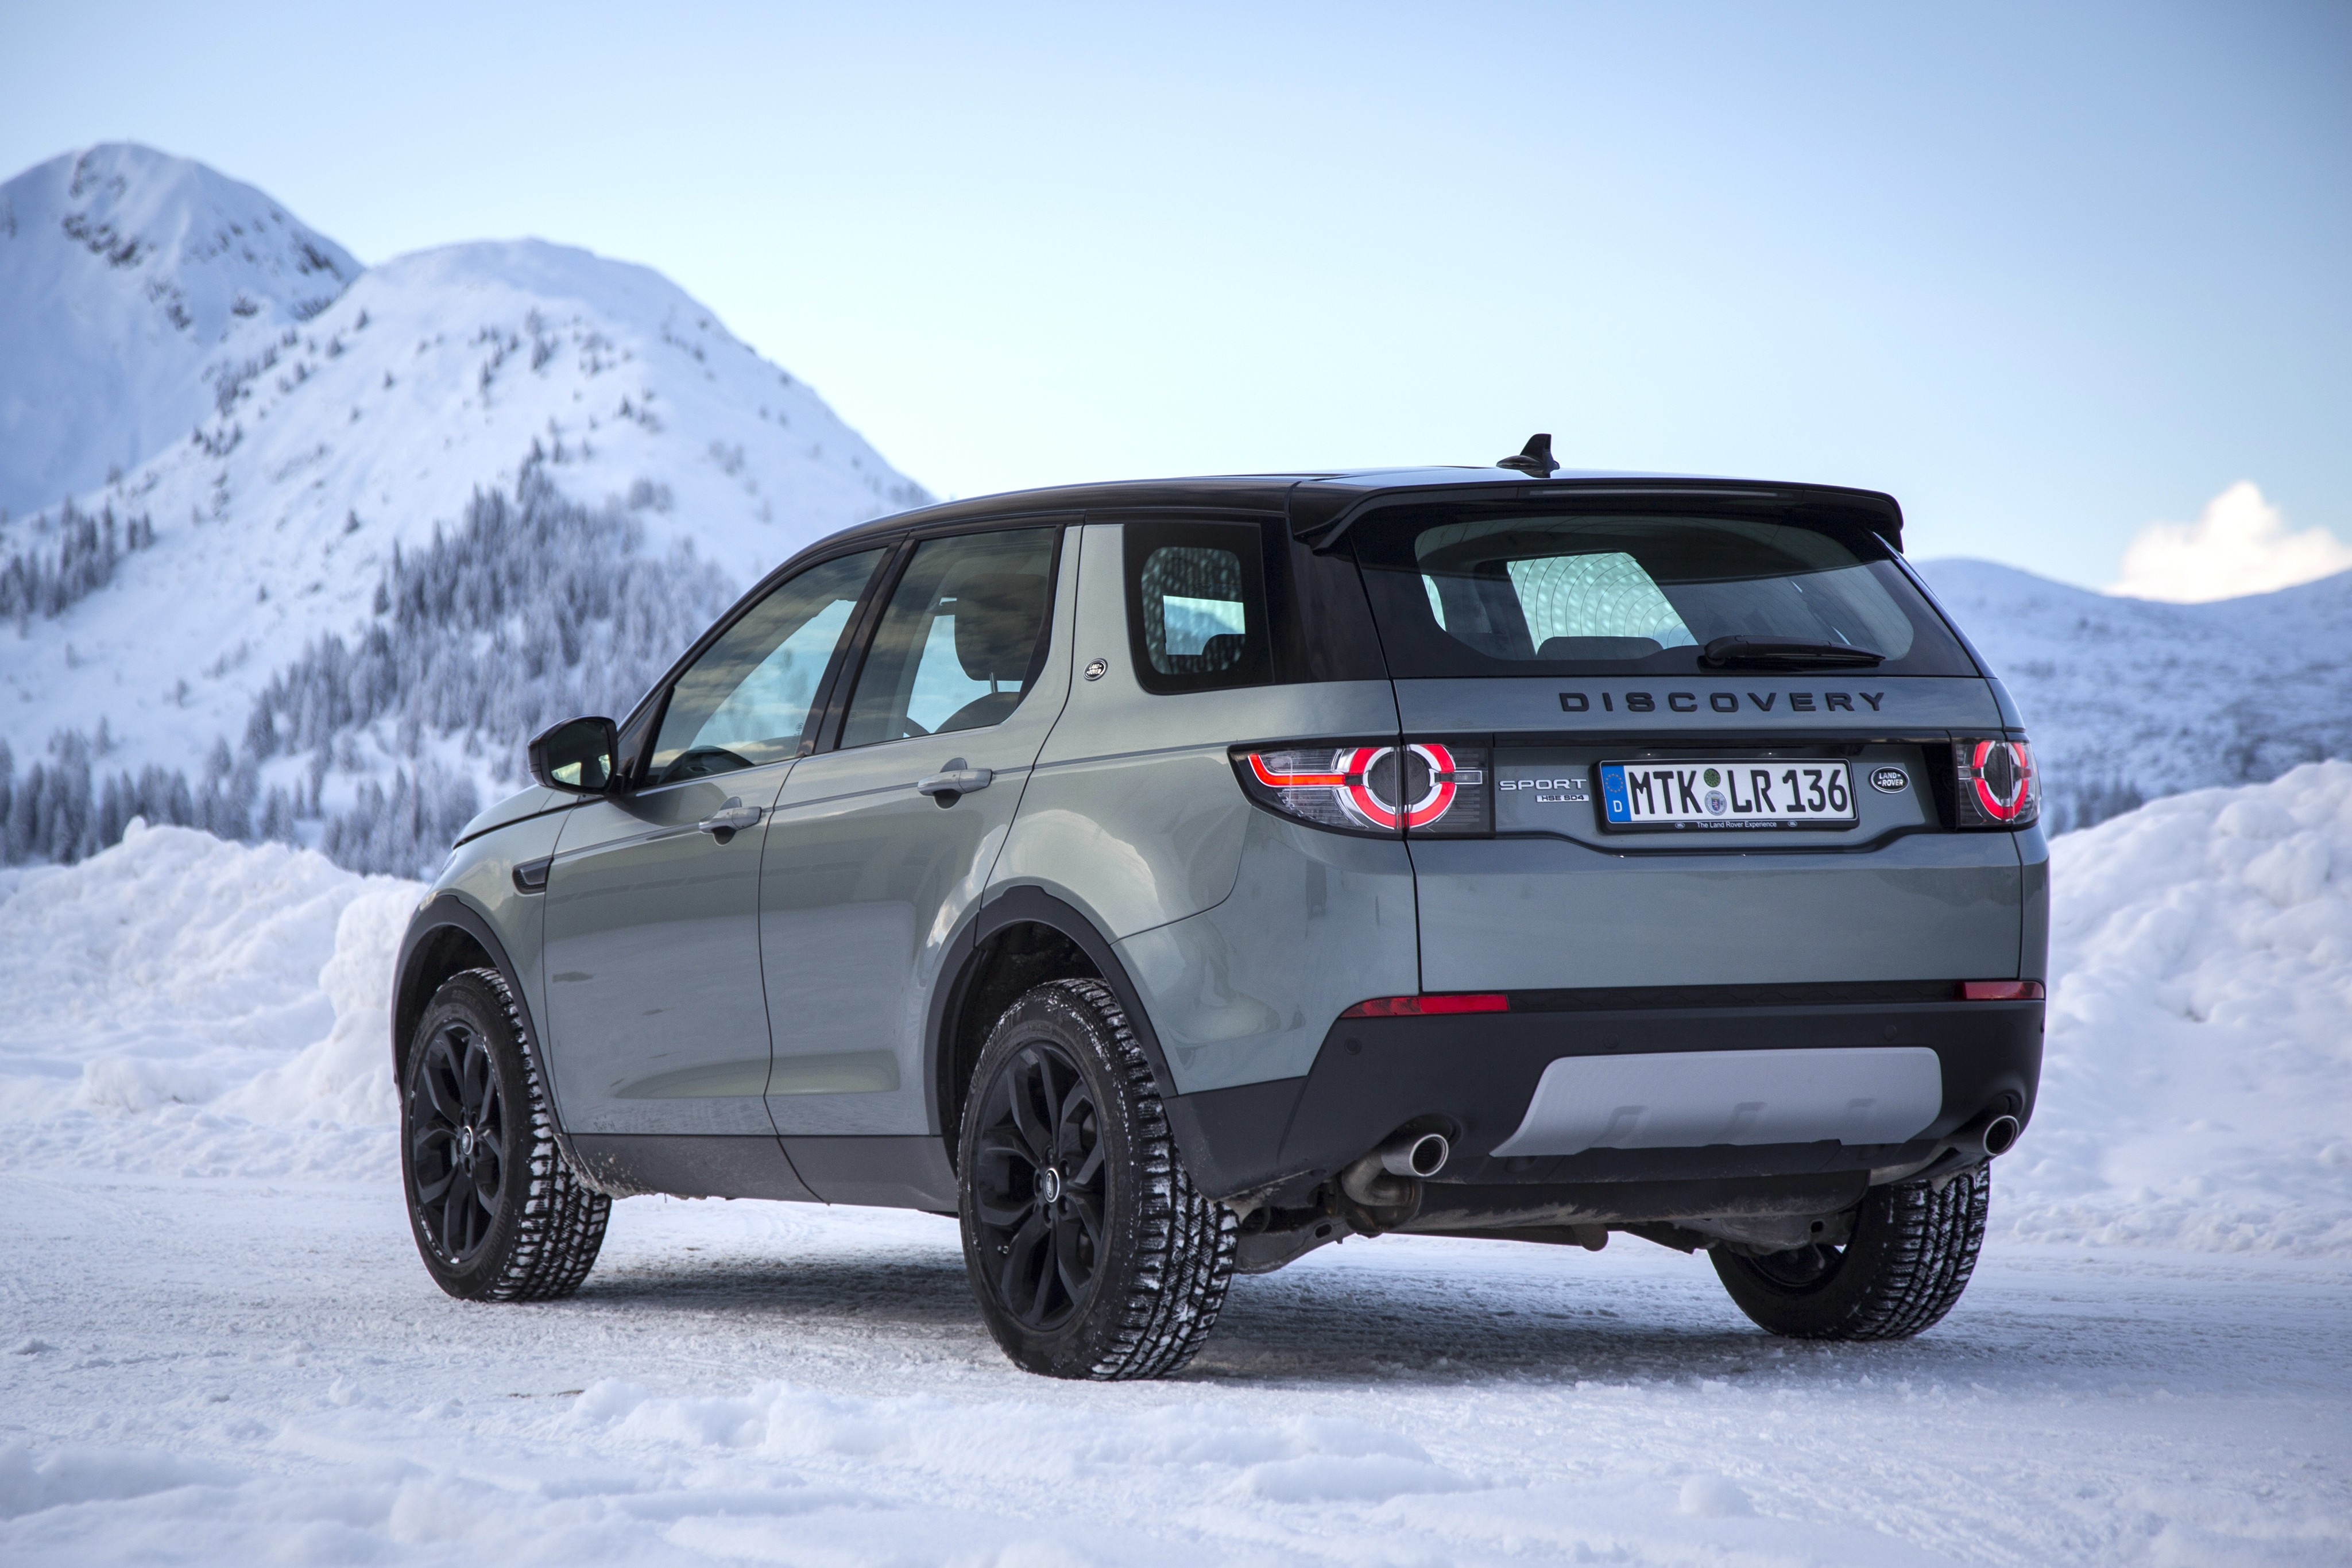 LAND ROVER Discovery Sport 2014, 2015, 2016 autoevolution